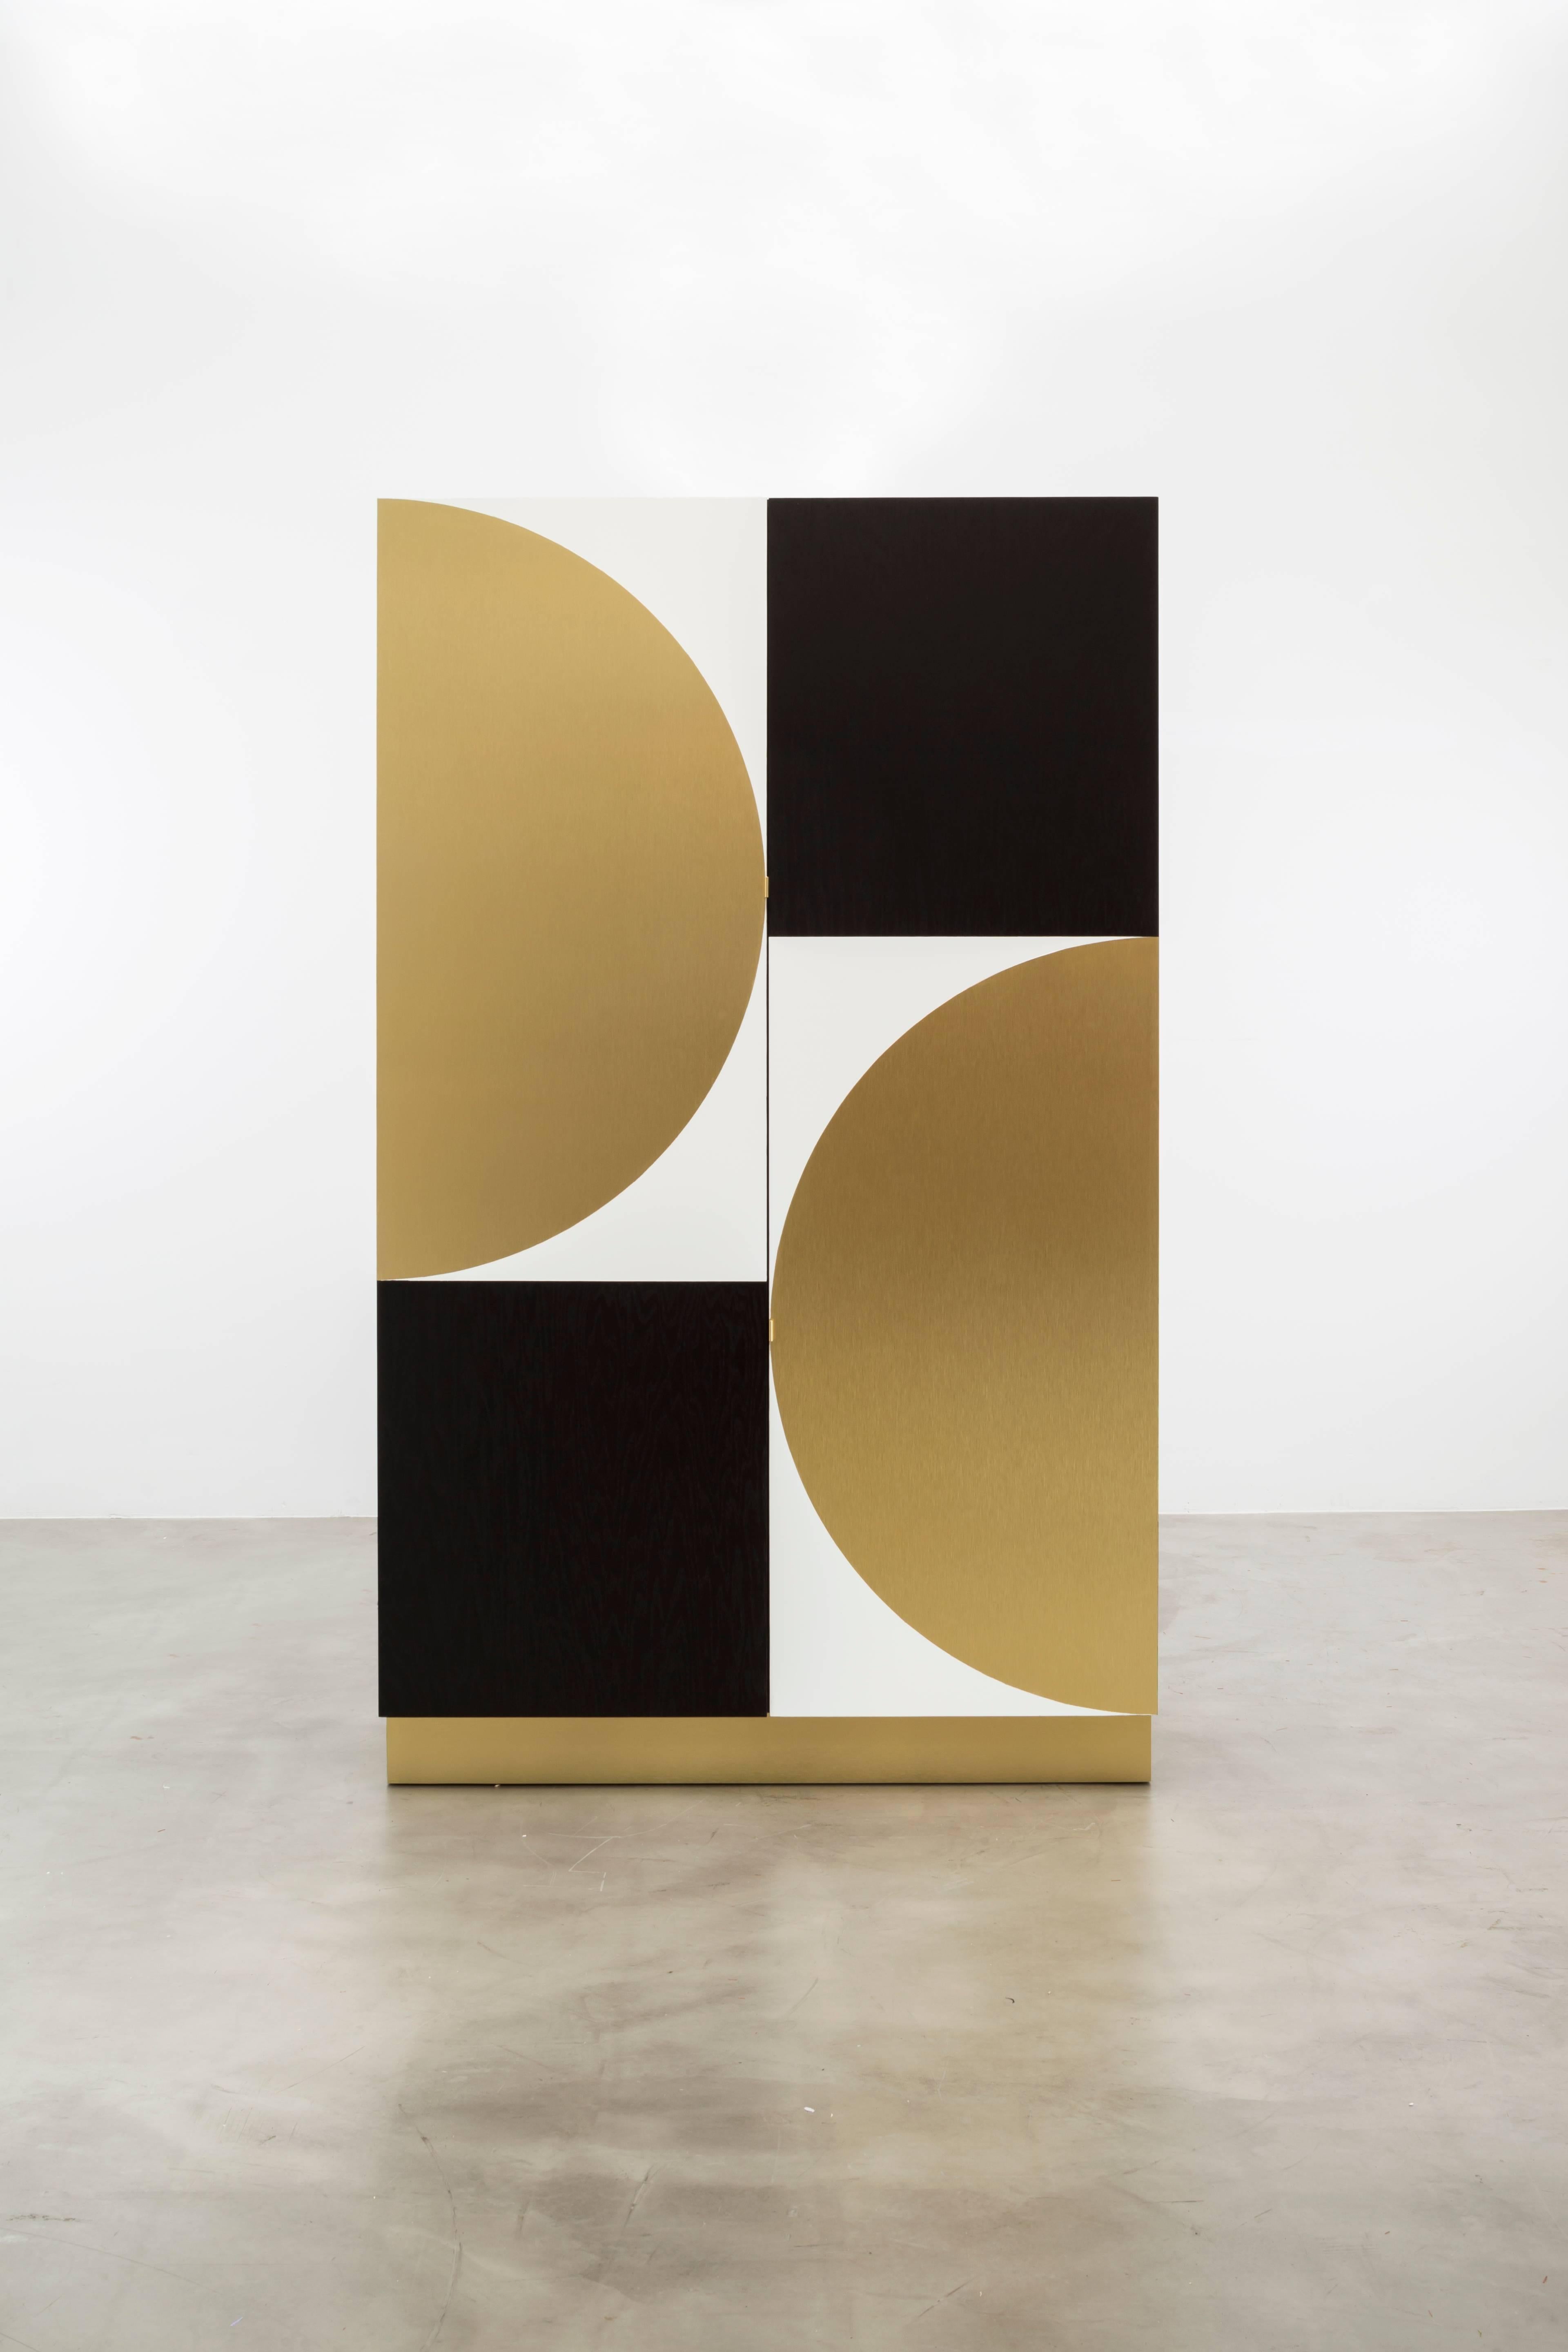 PHILIPPE CABINET - Modern Geometric Brass Inlay on an Oak and Acrylic Body.

The Philippe Storage Cabinet features a modern geometric brass inlay detail on a mixed oak and acrylic body. The interior is shown as a storage cabinet with six drawers,